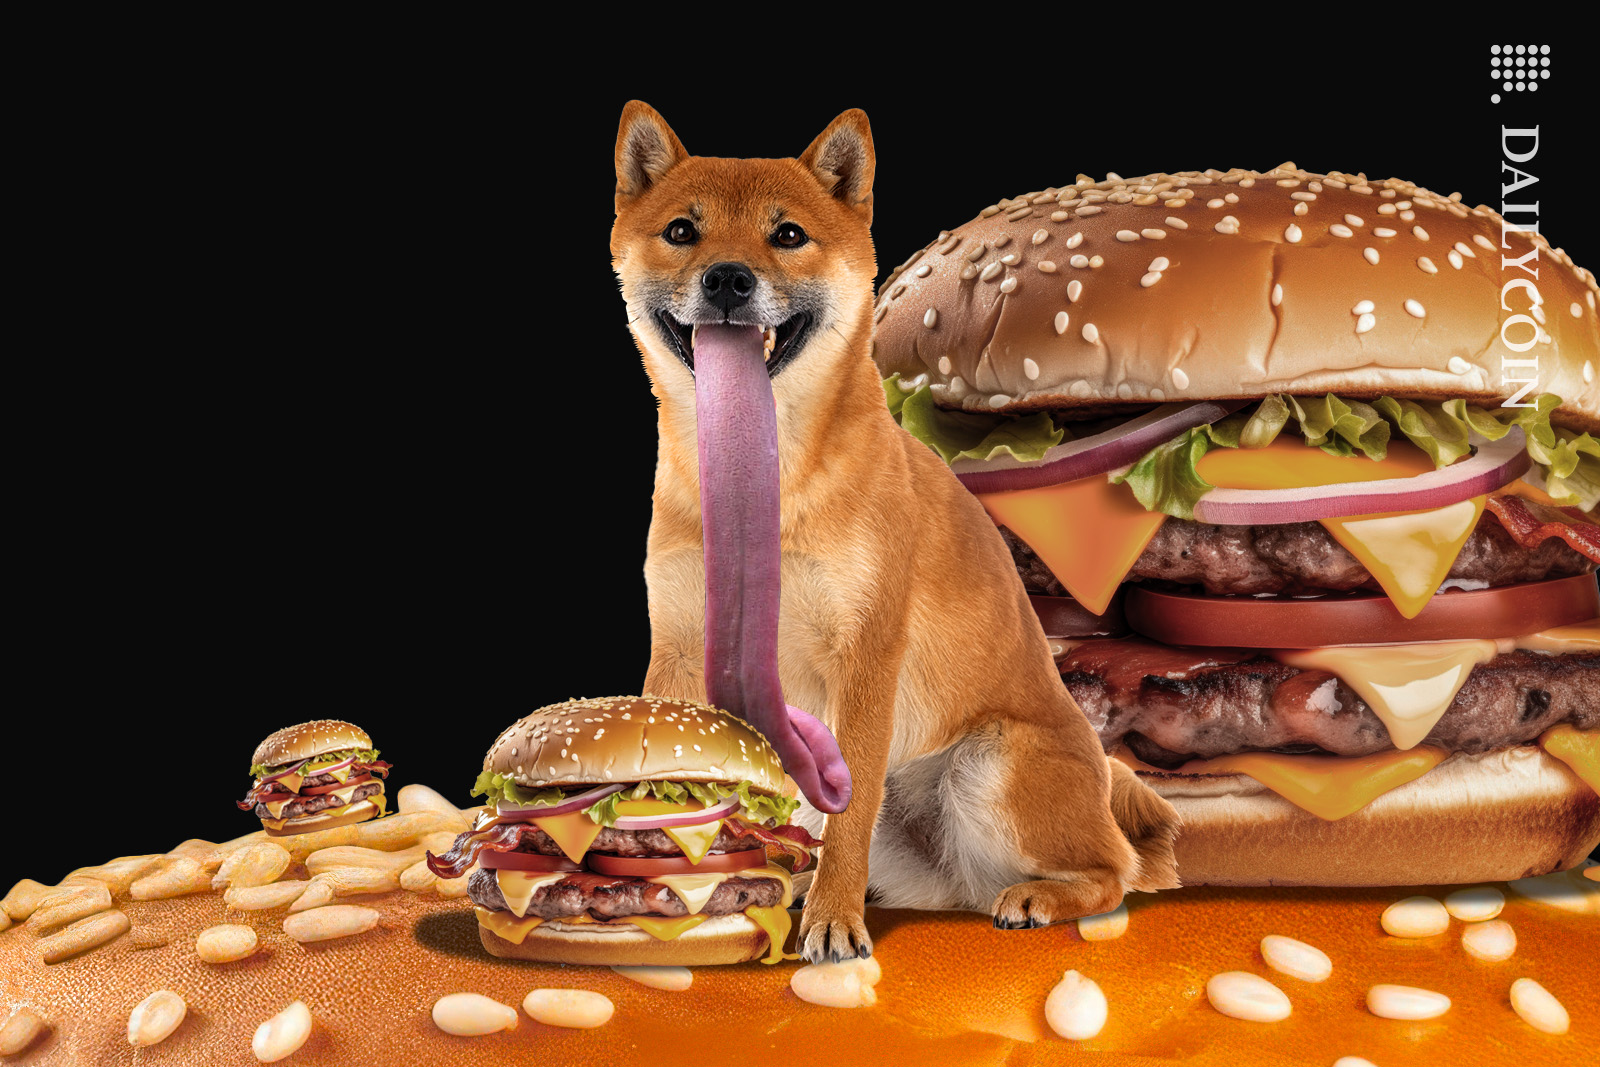 Shiba Inu licking a delicious looking burger with an extraorinary tongue.